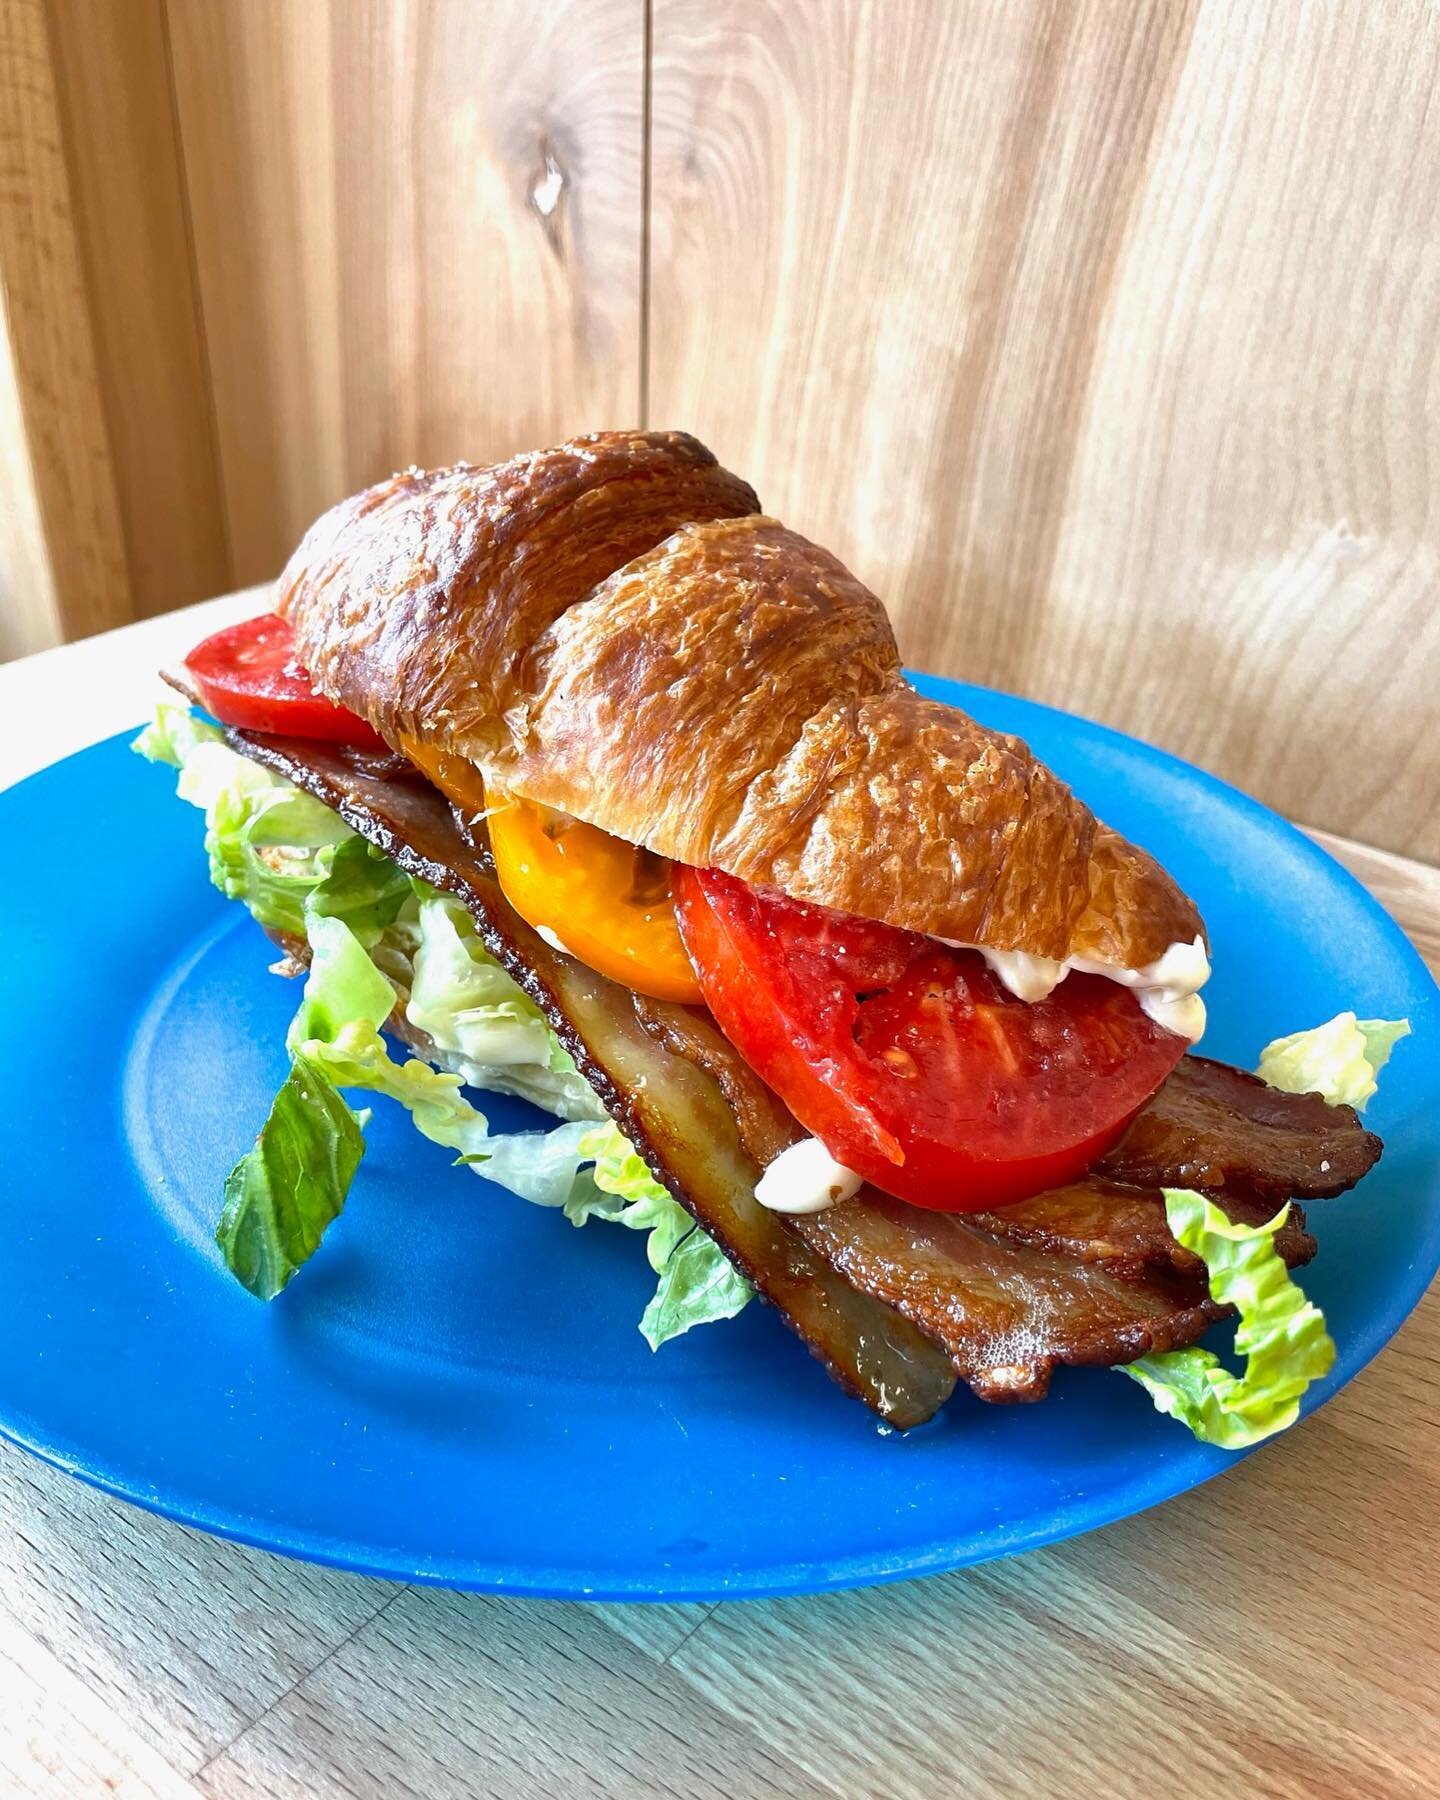 We can think of a whole buncha ways to use summertime tomatoes 🍅 But a BLT seems like a pretty good idea!